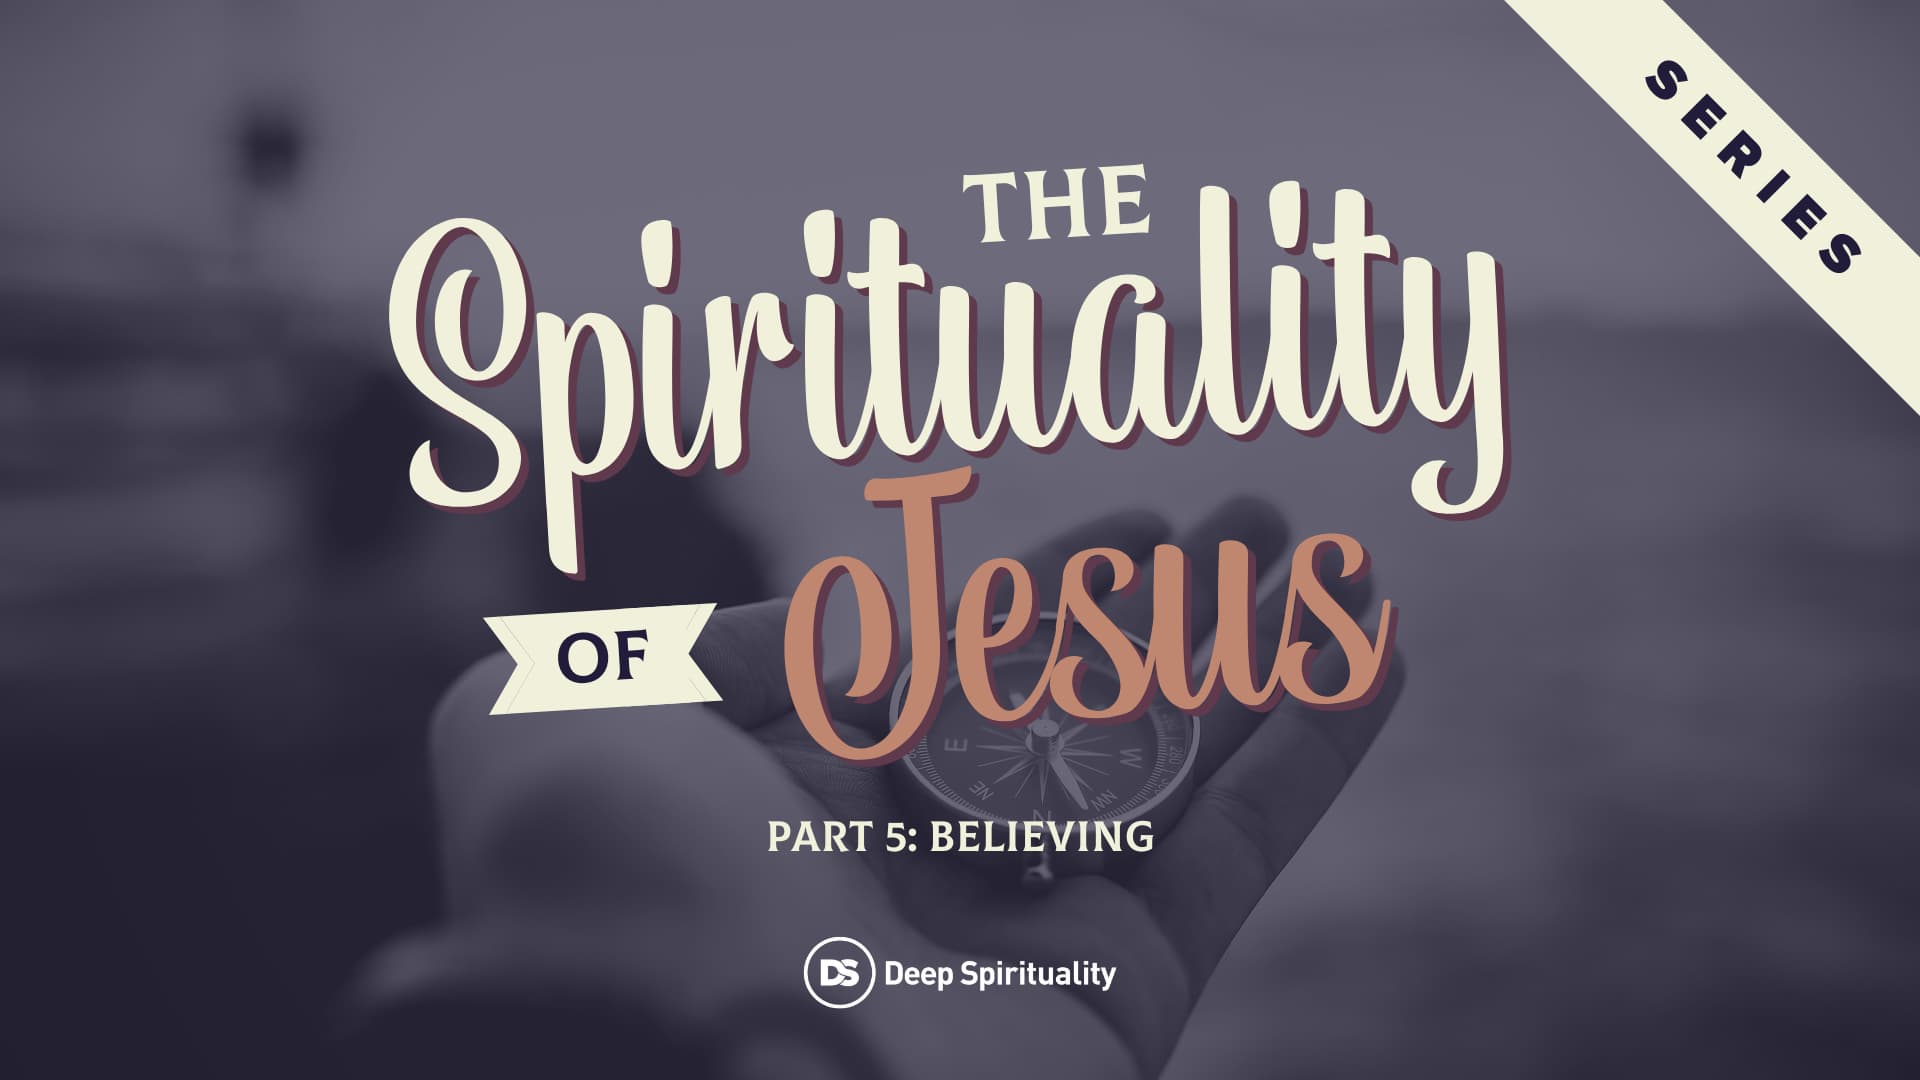 The Spirituality of Jesus, Part 5: Believing 10